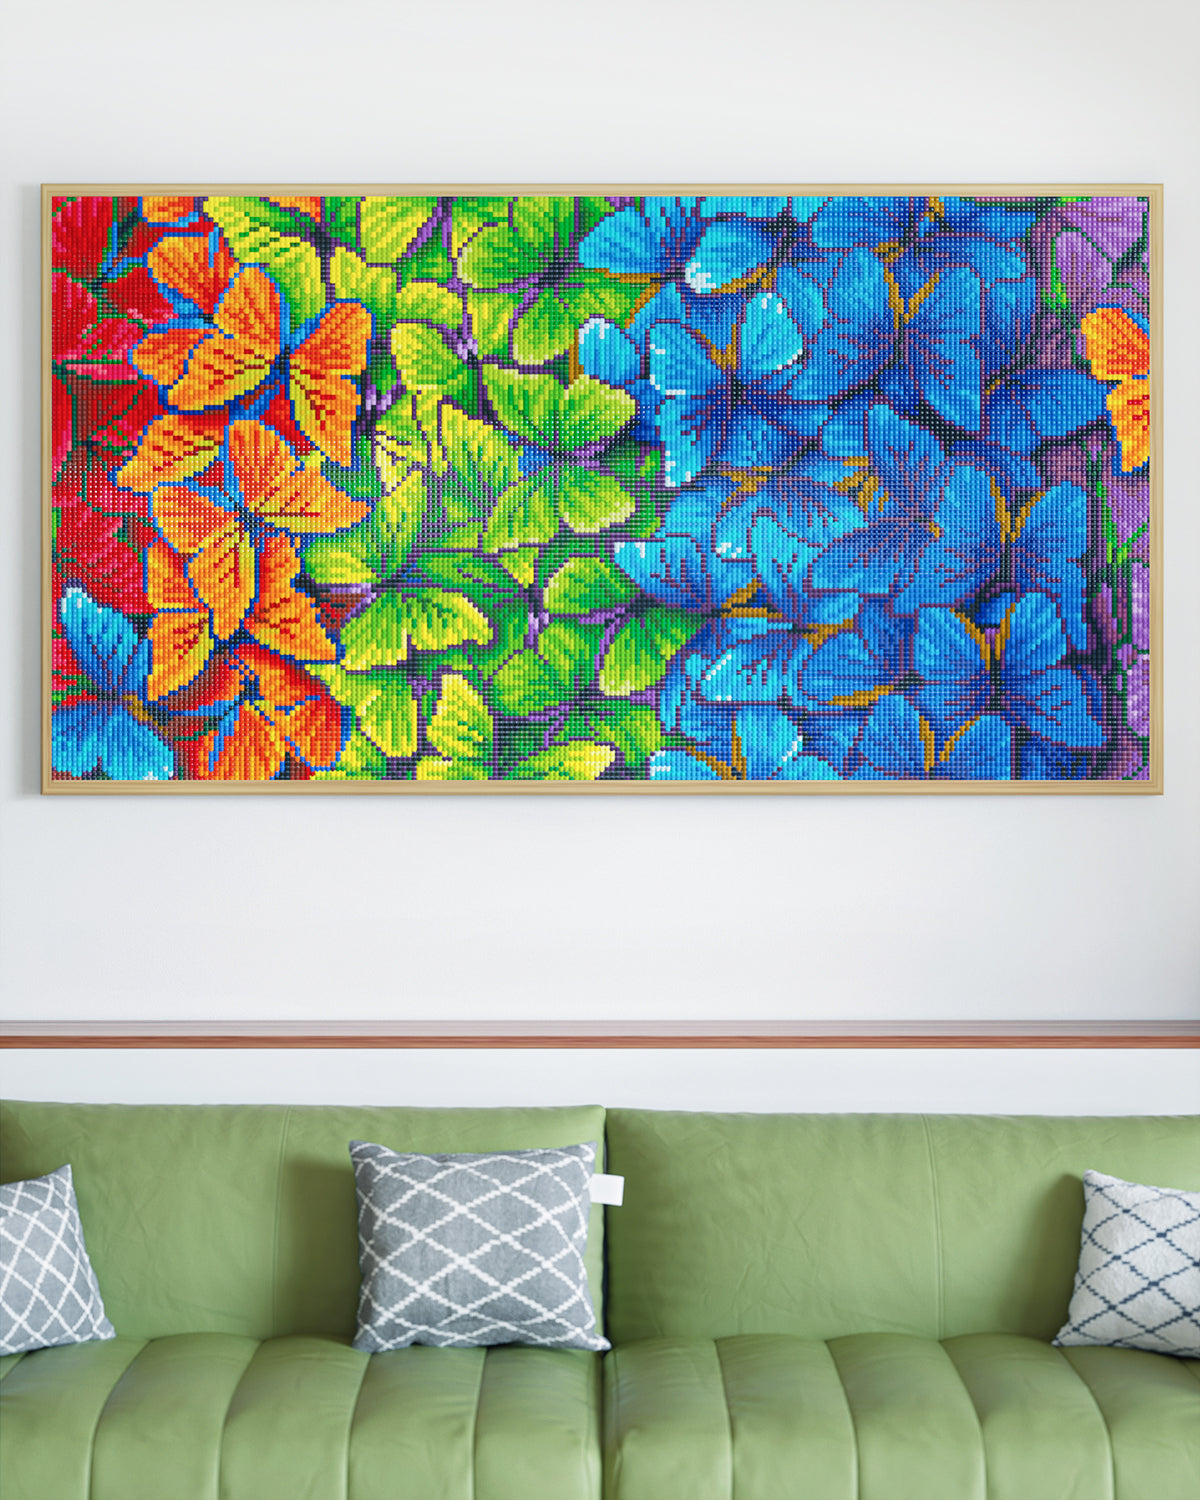 Decorate your home with Artdot Diamond Paintings